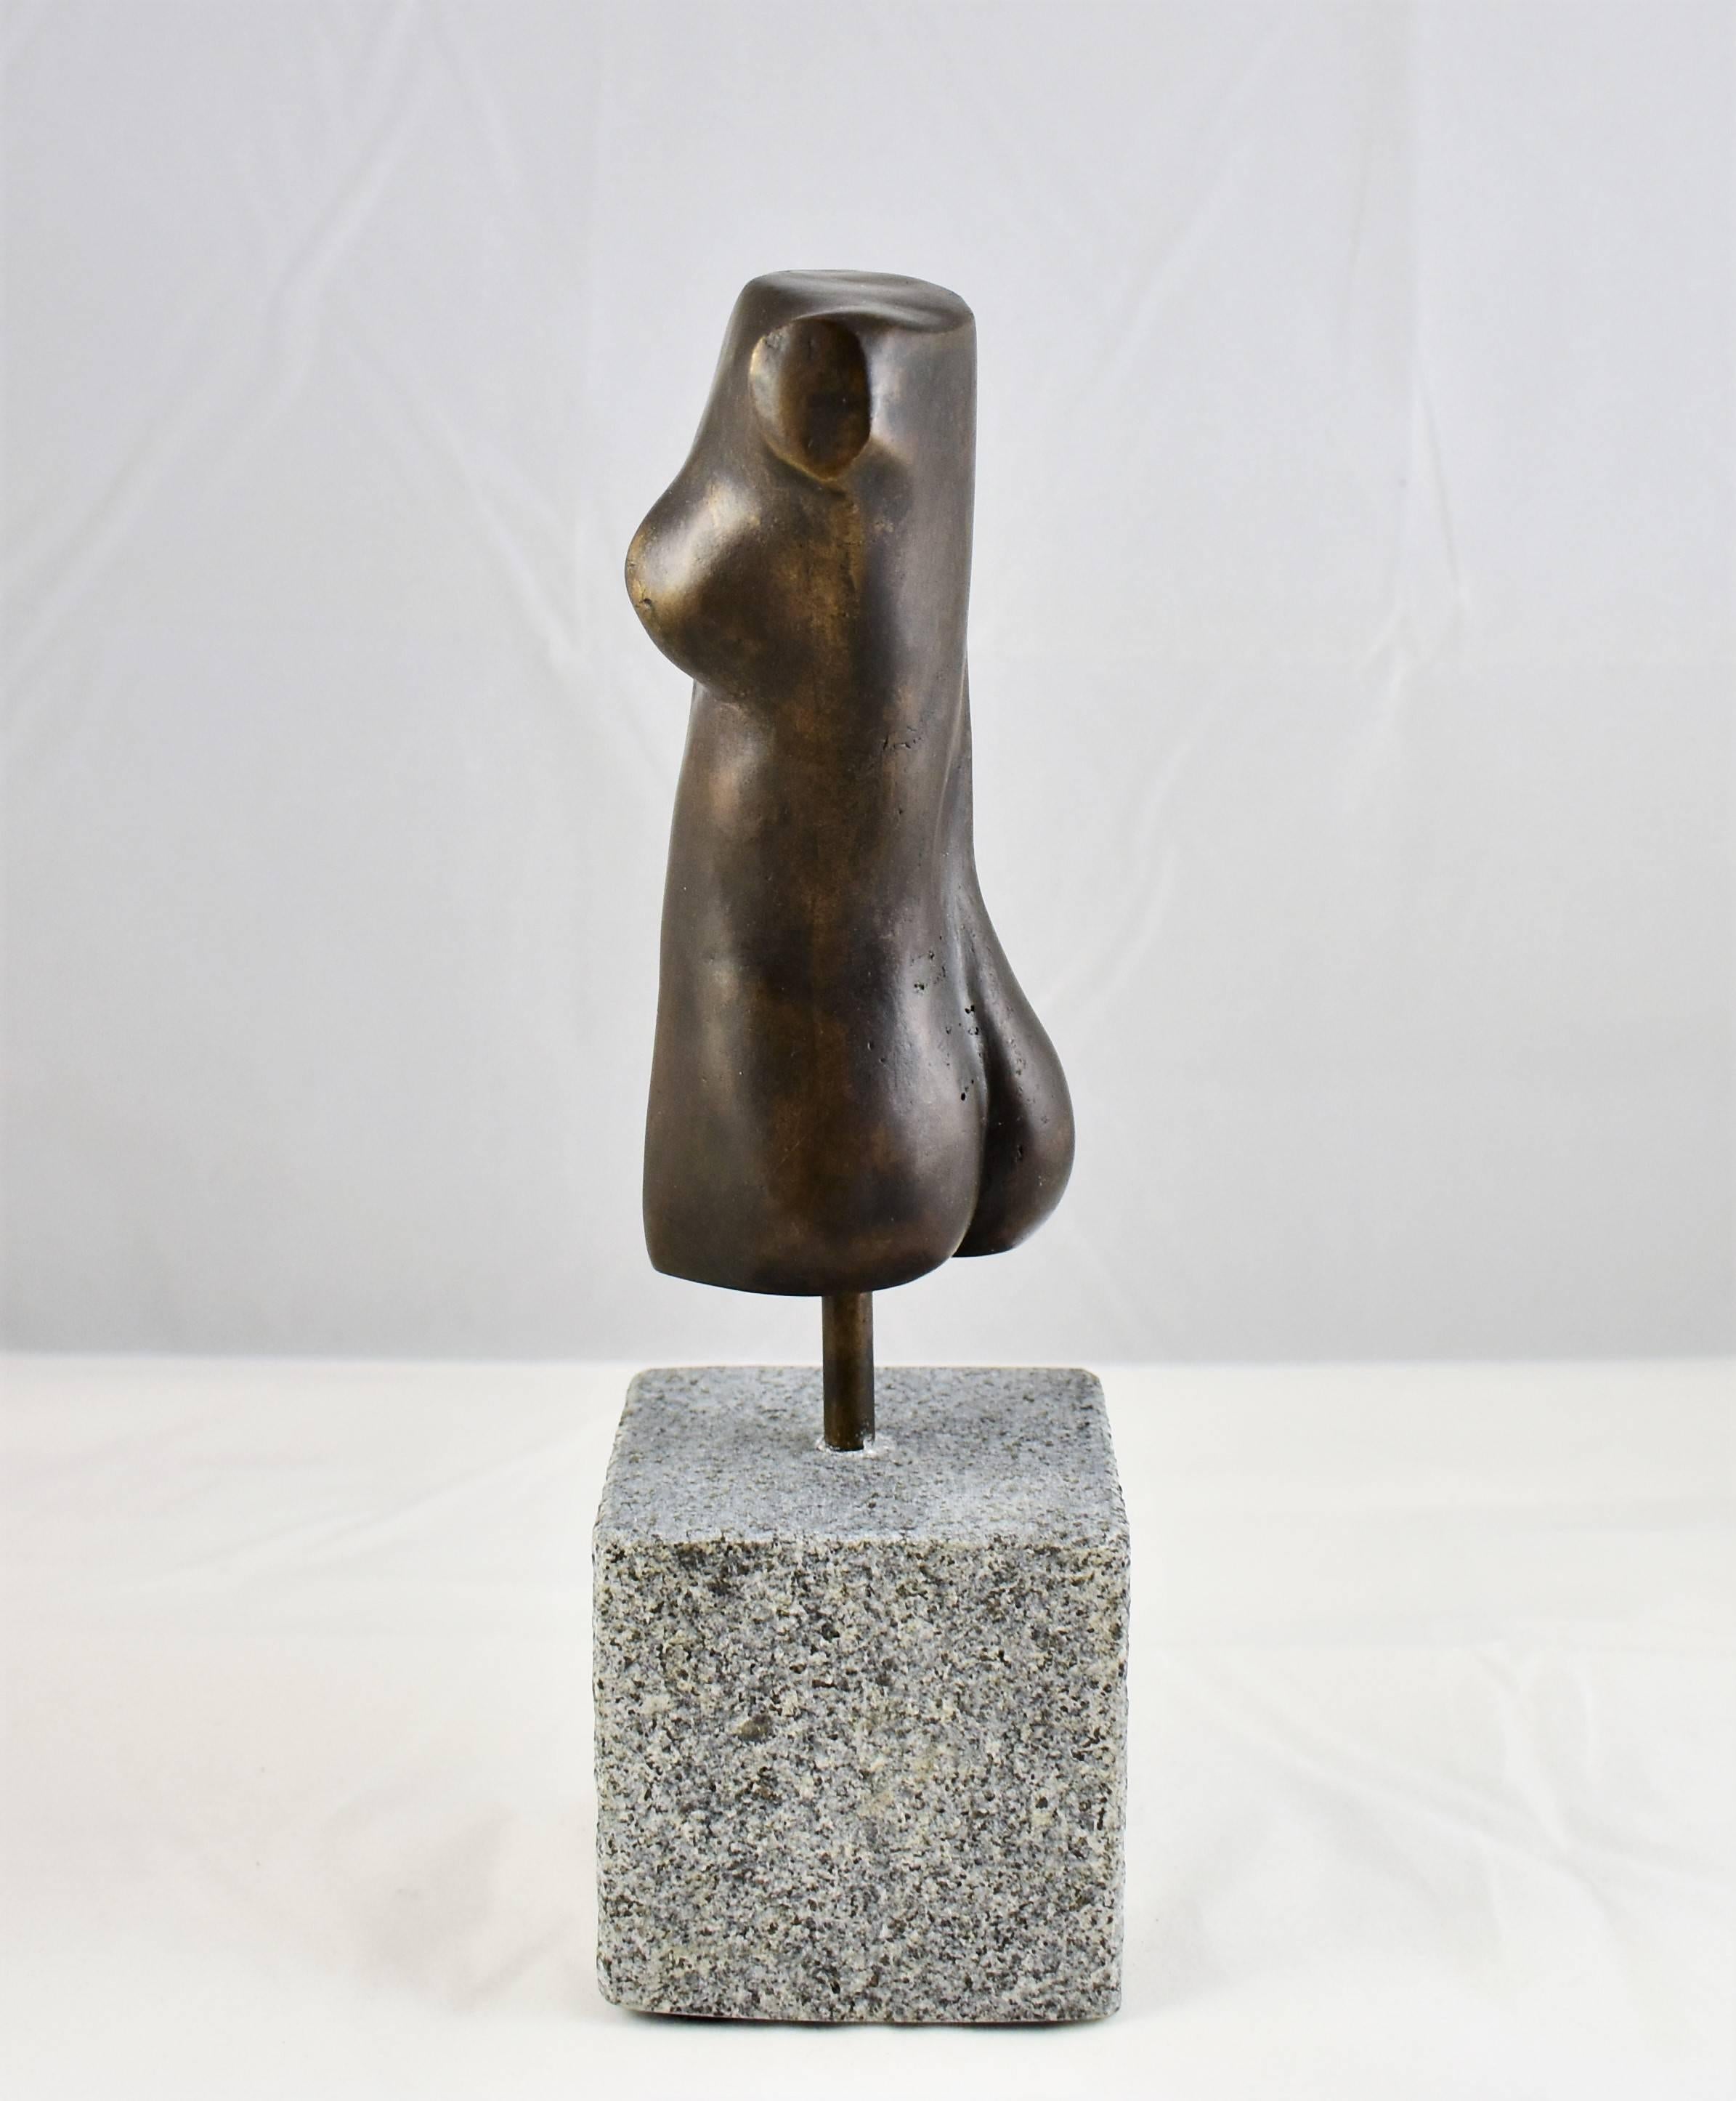 A modern bronze sculpture of a female form/torso with a black patina finish. Hand made by the artist then hand cast. Modernistic and artistic design capturing the essence of the female form with graceful lines, beautiful from every angle. Mounted on